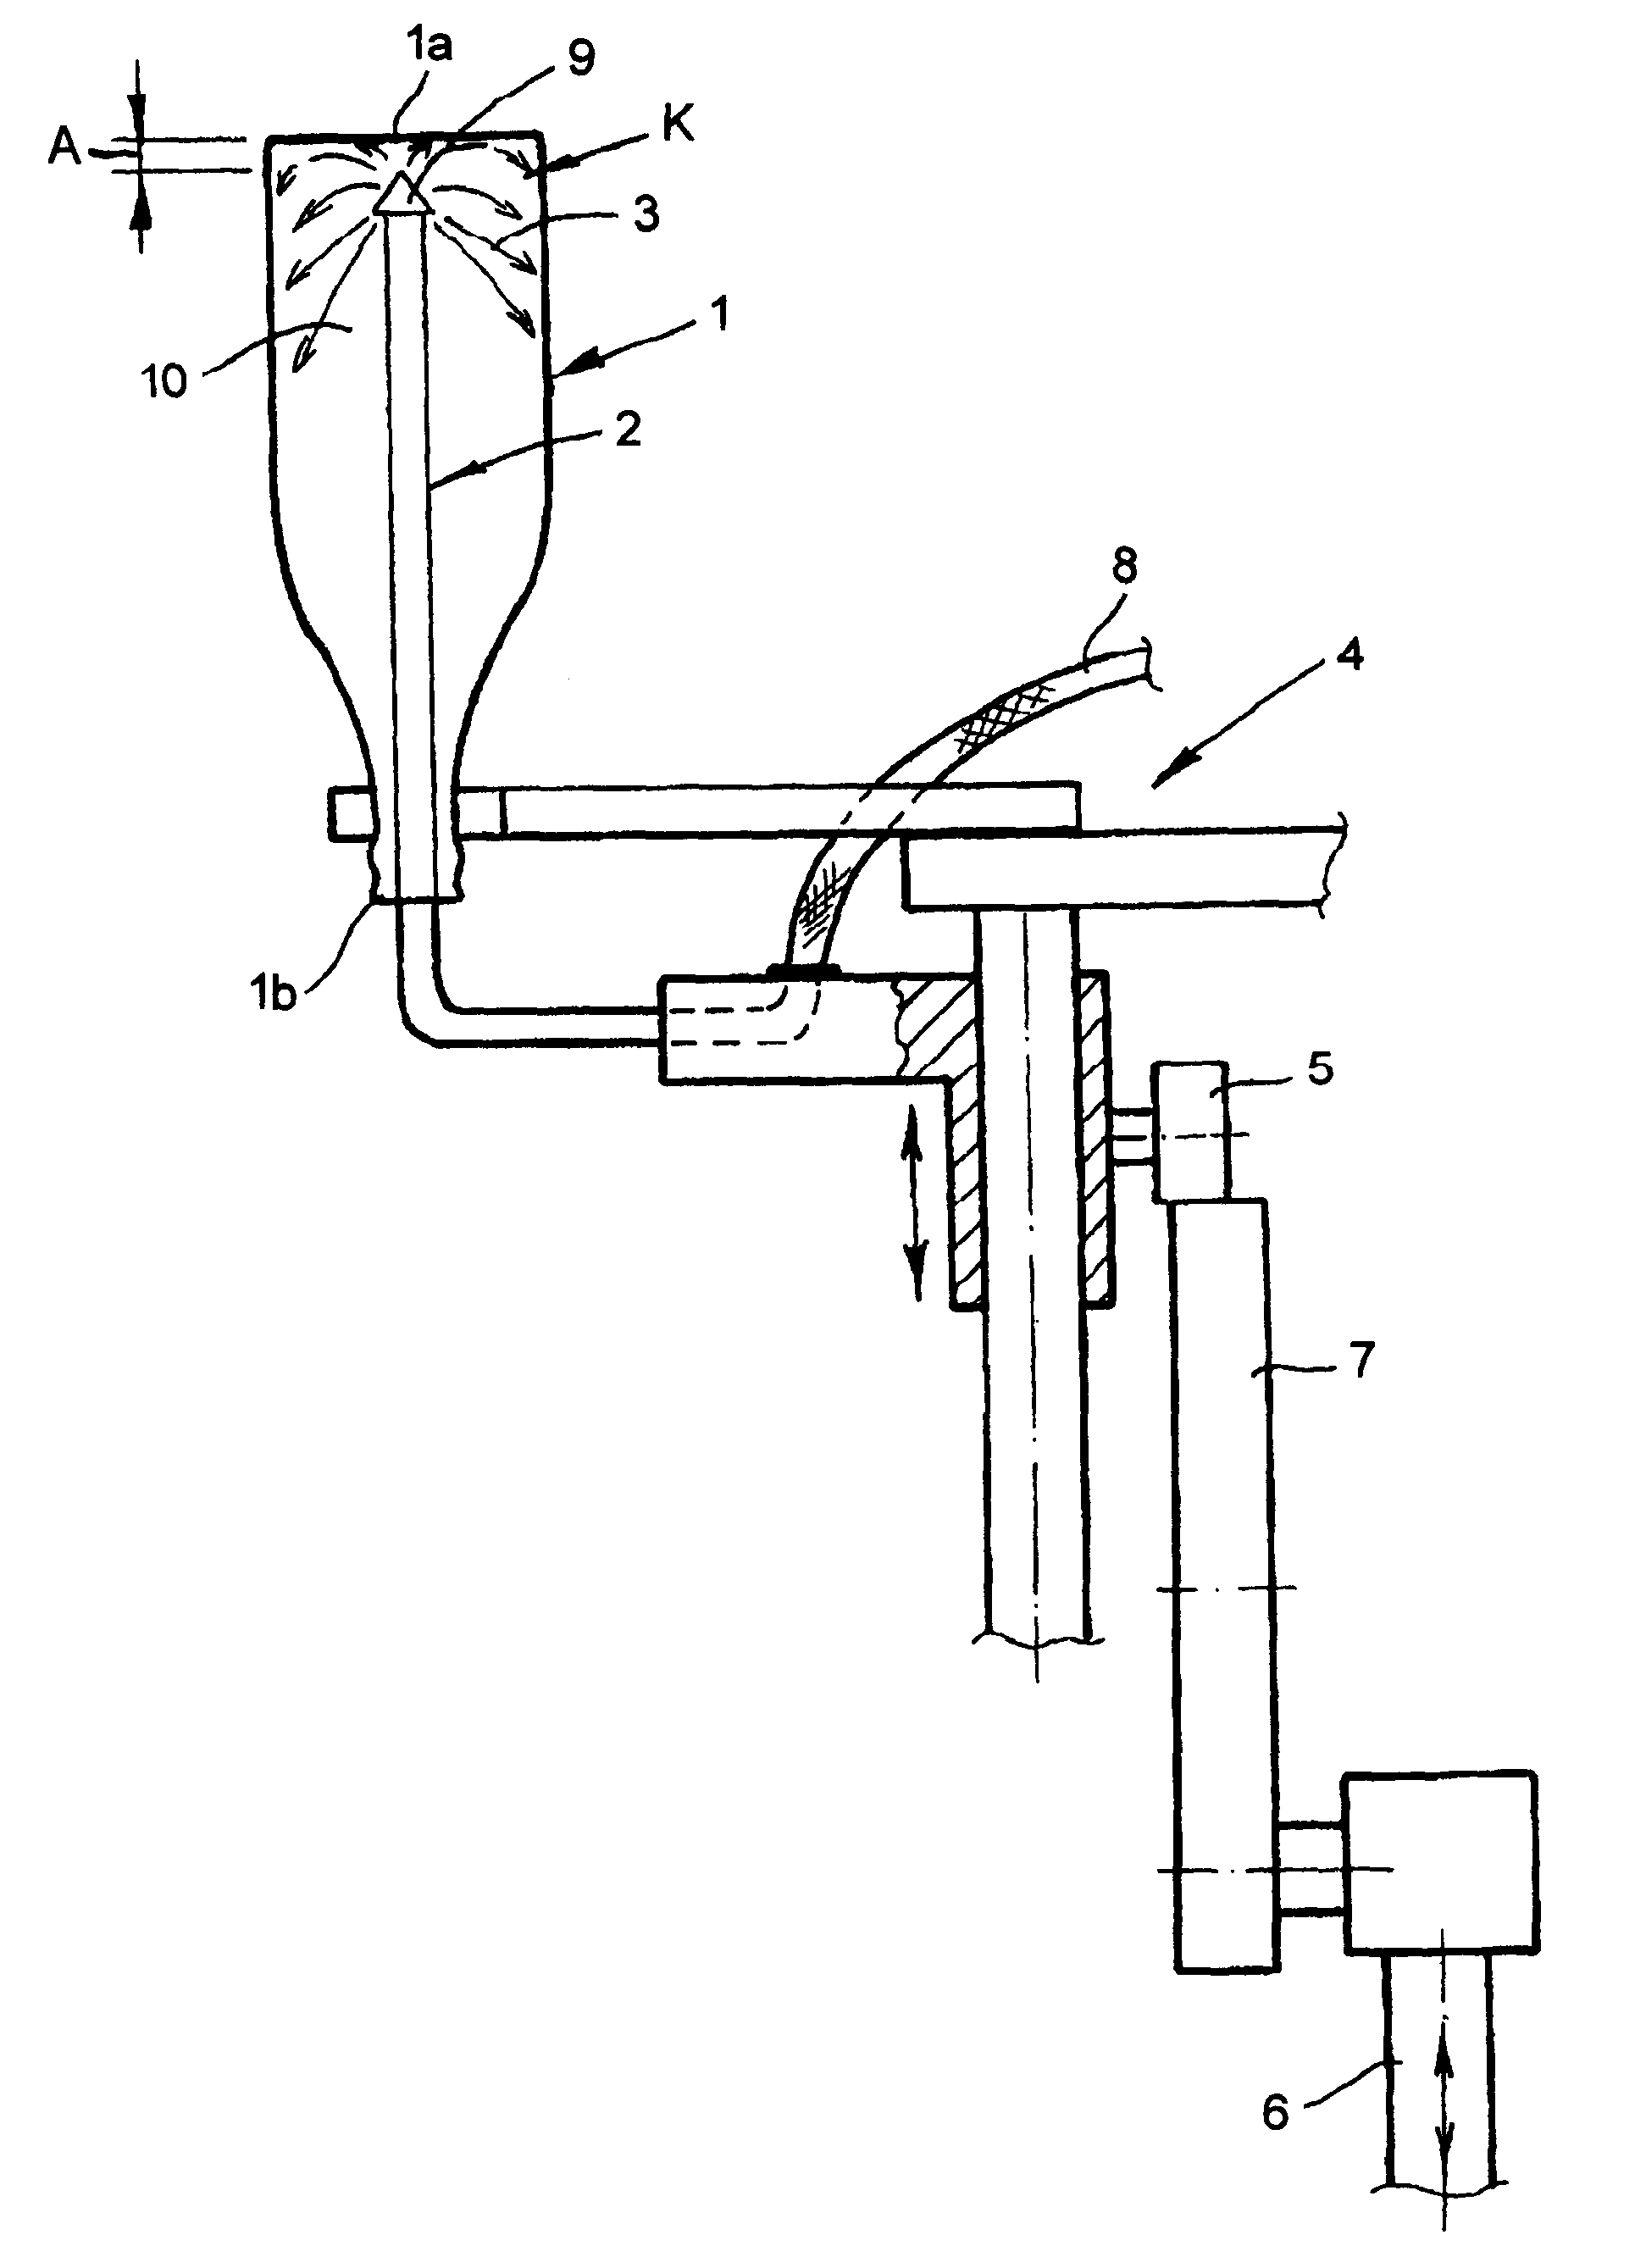 Method of cleaning beverage bottles in a beverage bottling plant, a method of cleaning containers in a container filling plant, and an apparatus therefor